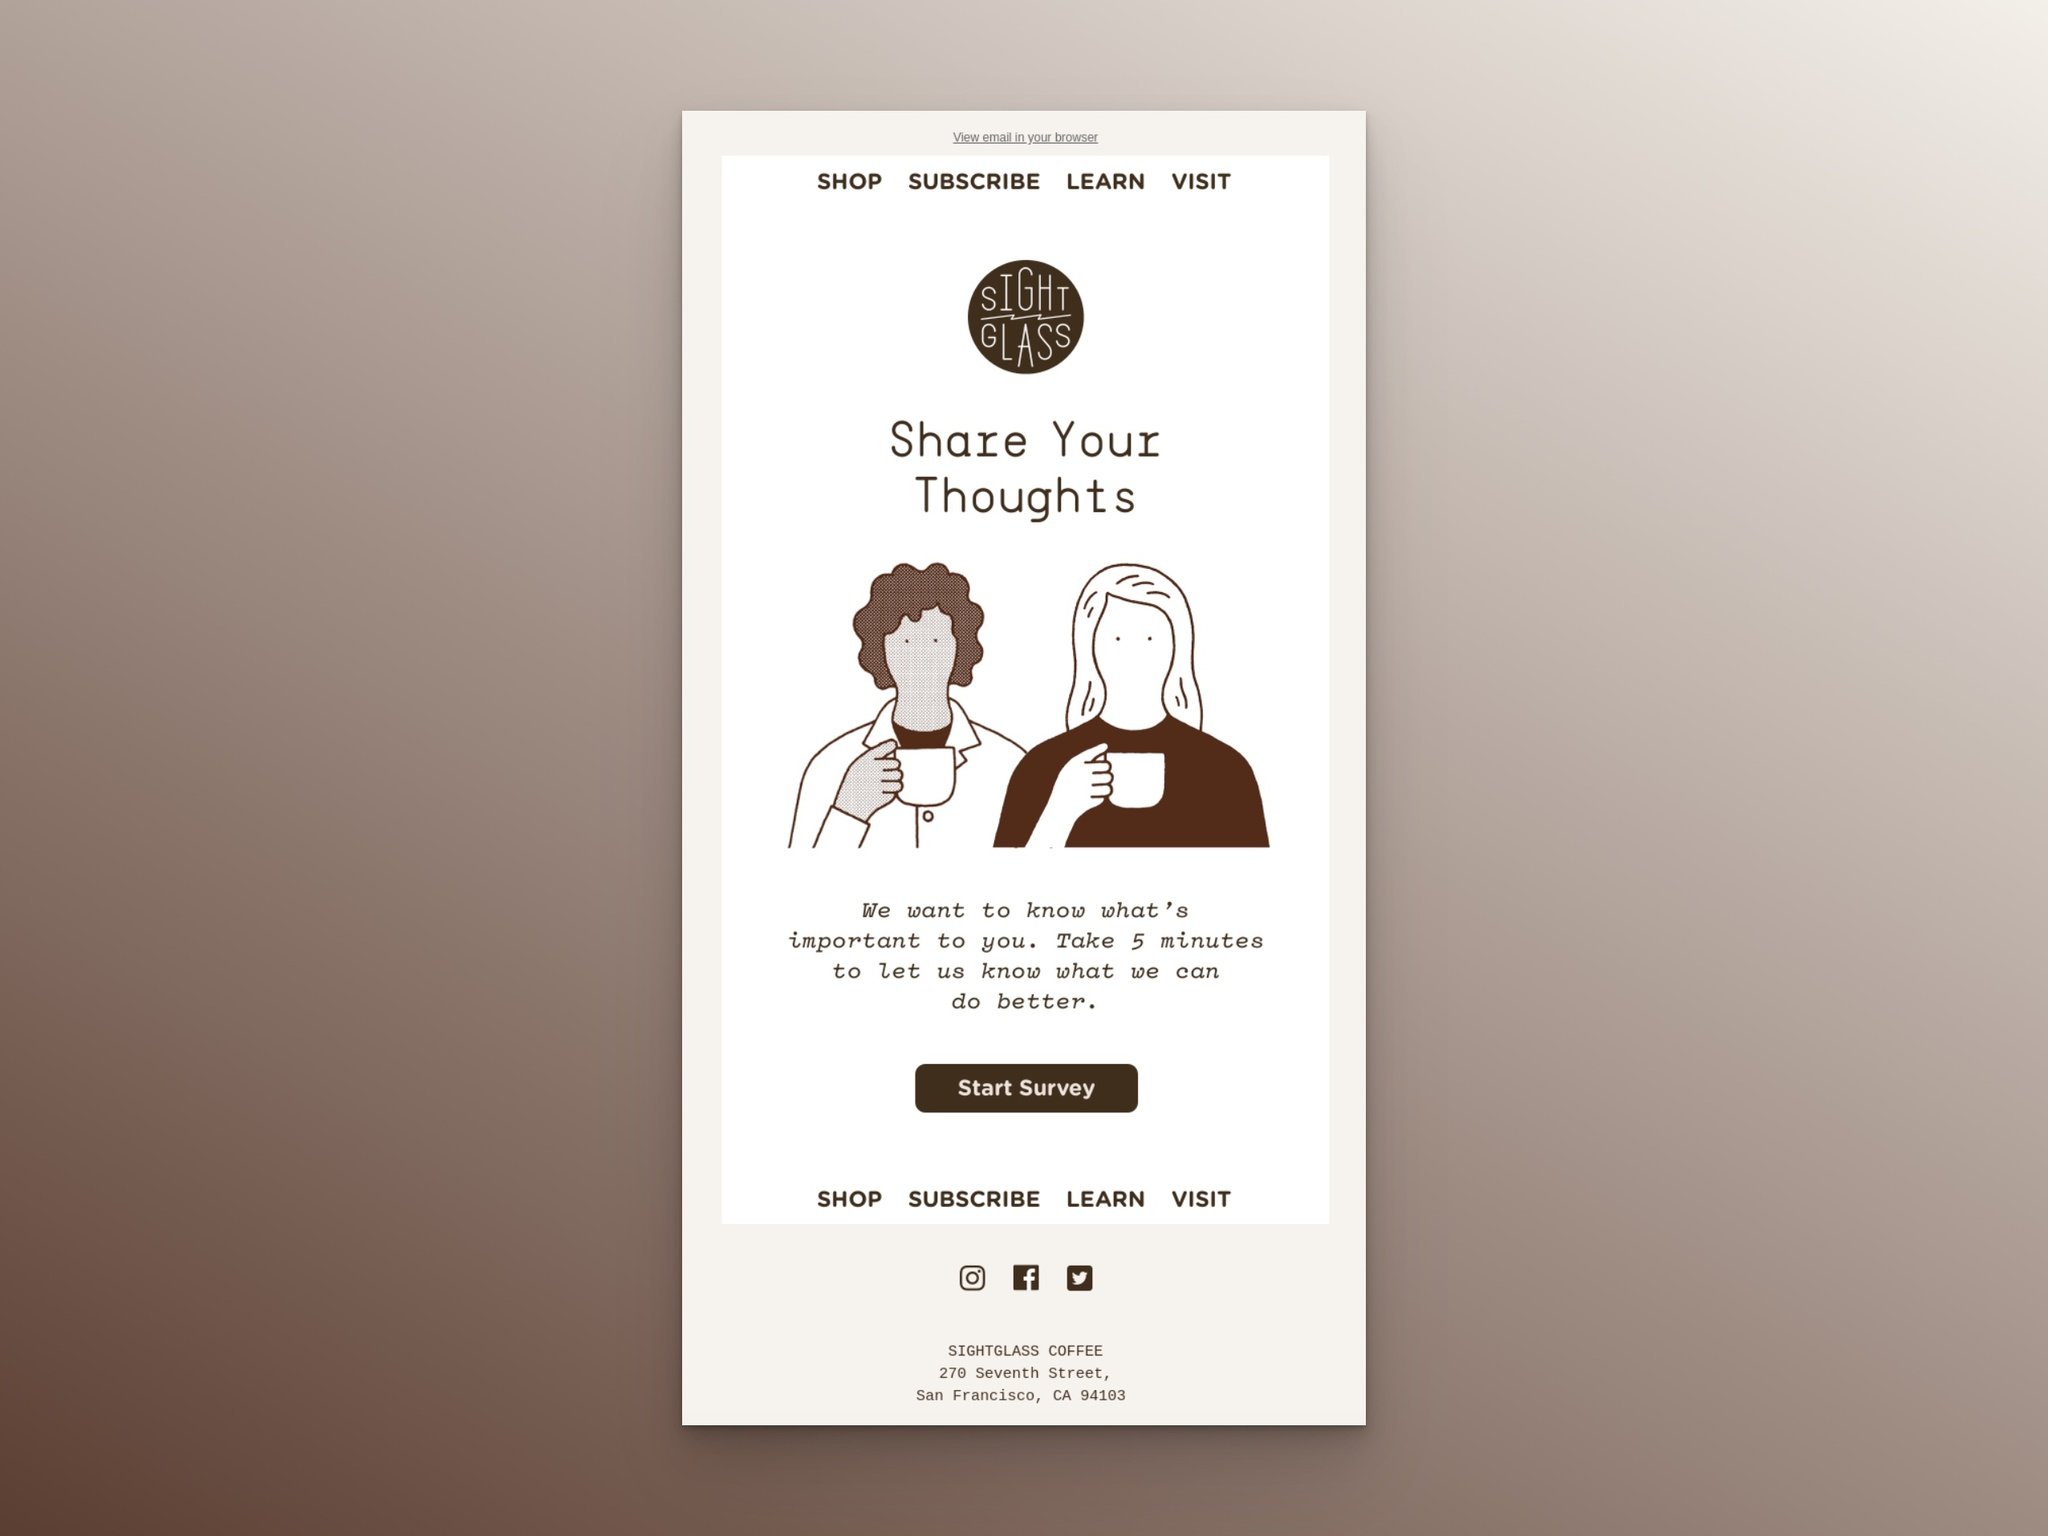 survey email example that says "Share Your Thoughts" and illustration of two women drinking coffee